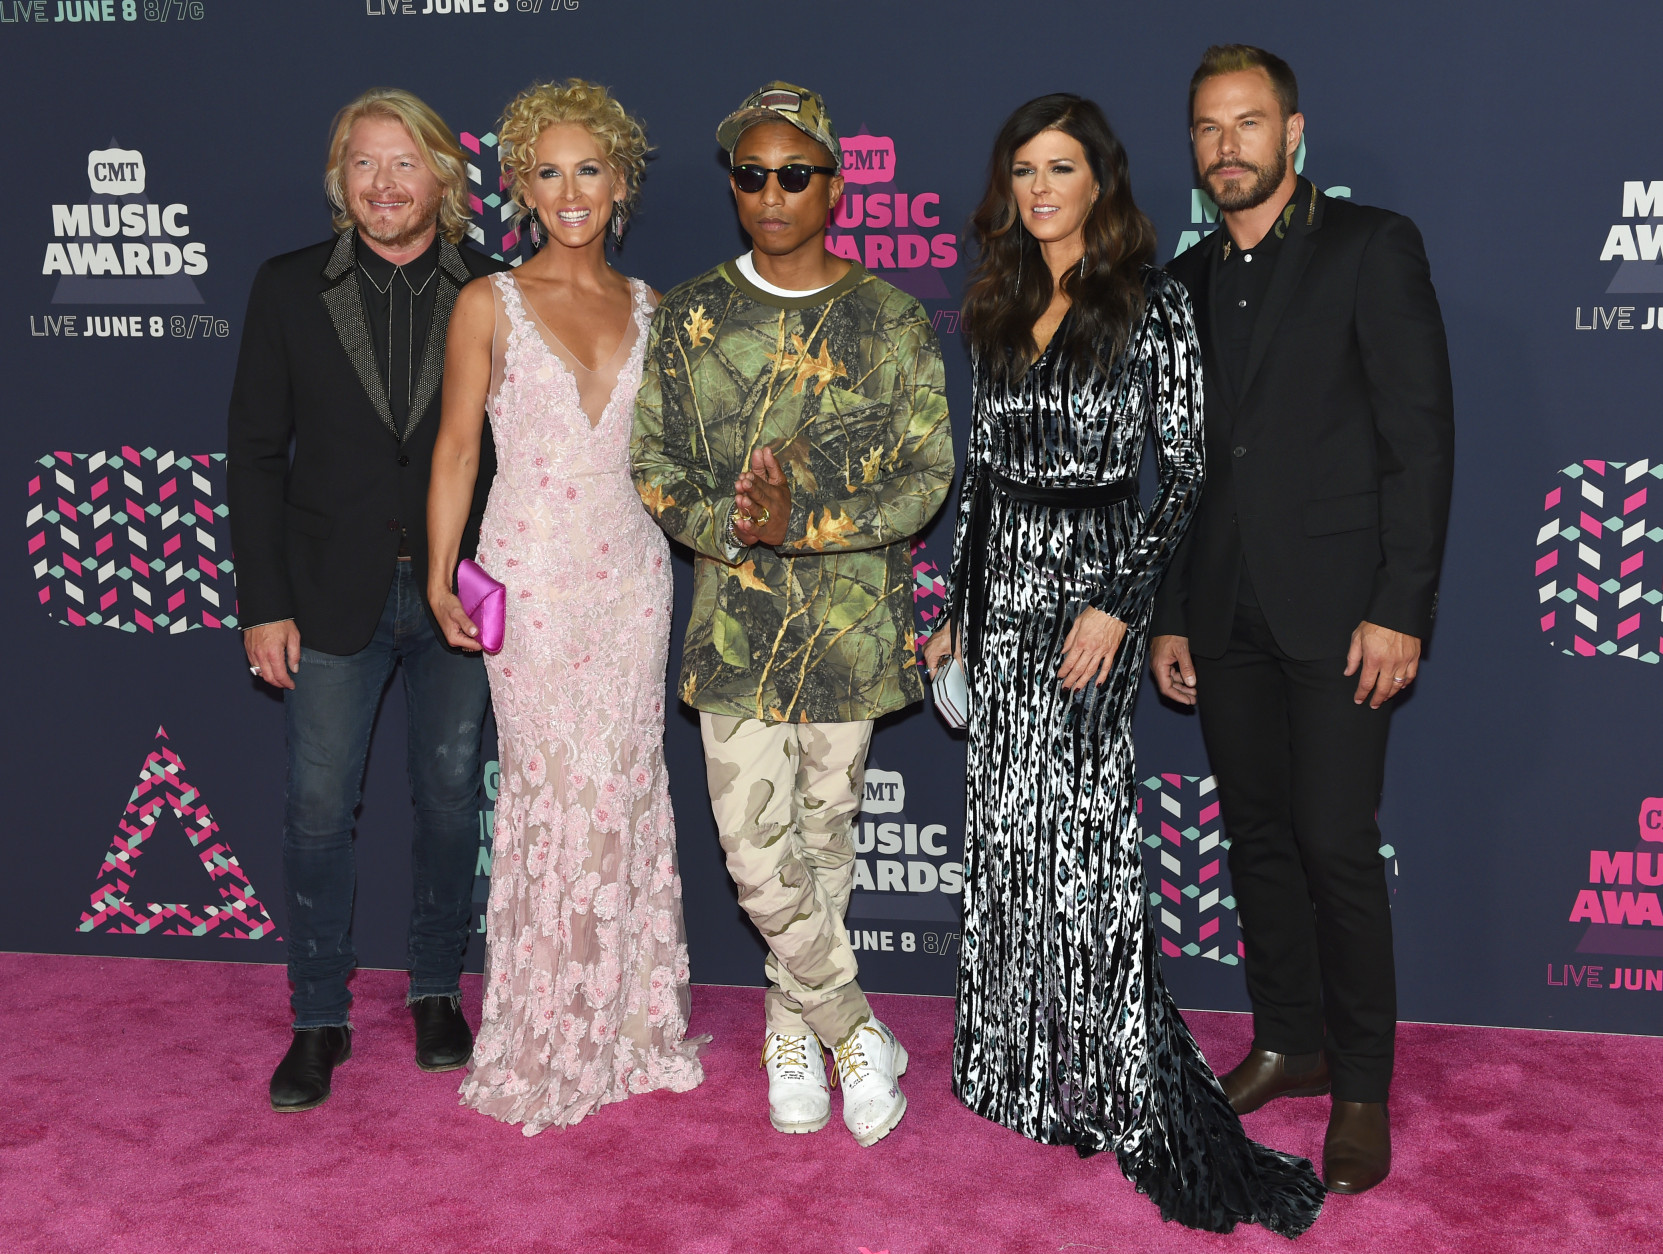 Philip Sweet, from left, Kimberly Schlapman, Pharrell Williams, Karen Fairchild and Jimi Westbrook arrive at the CMT Music Awards at the Bridgestone Arena on Wednesday, June 8, 2016, in Nashville, Tenn. (Photo by Sanford Myers/Invision/AP)